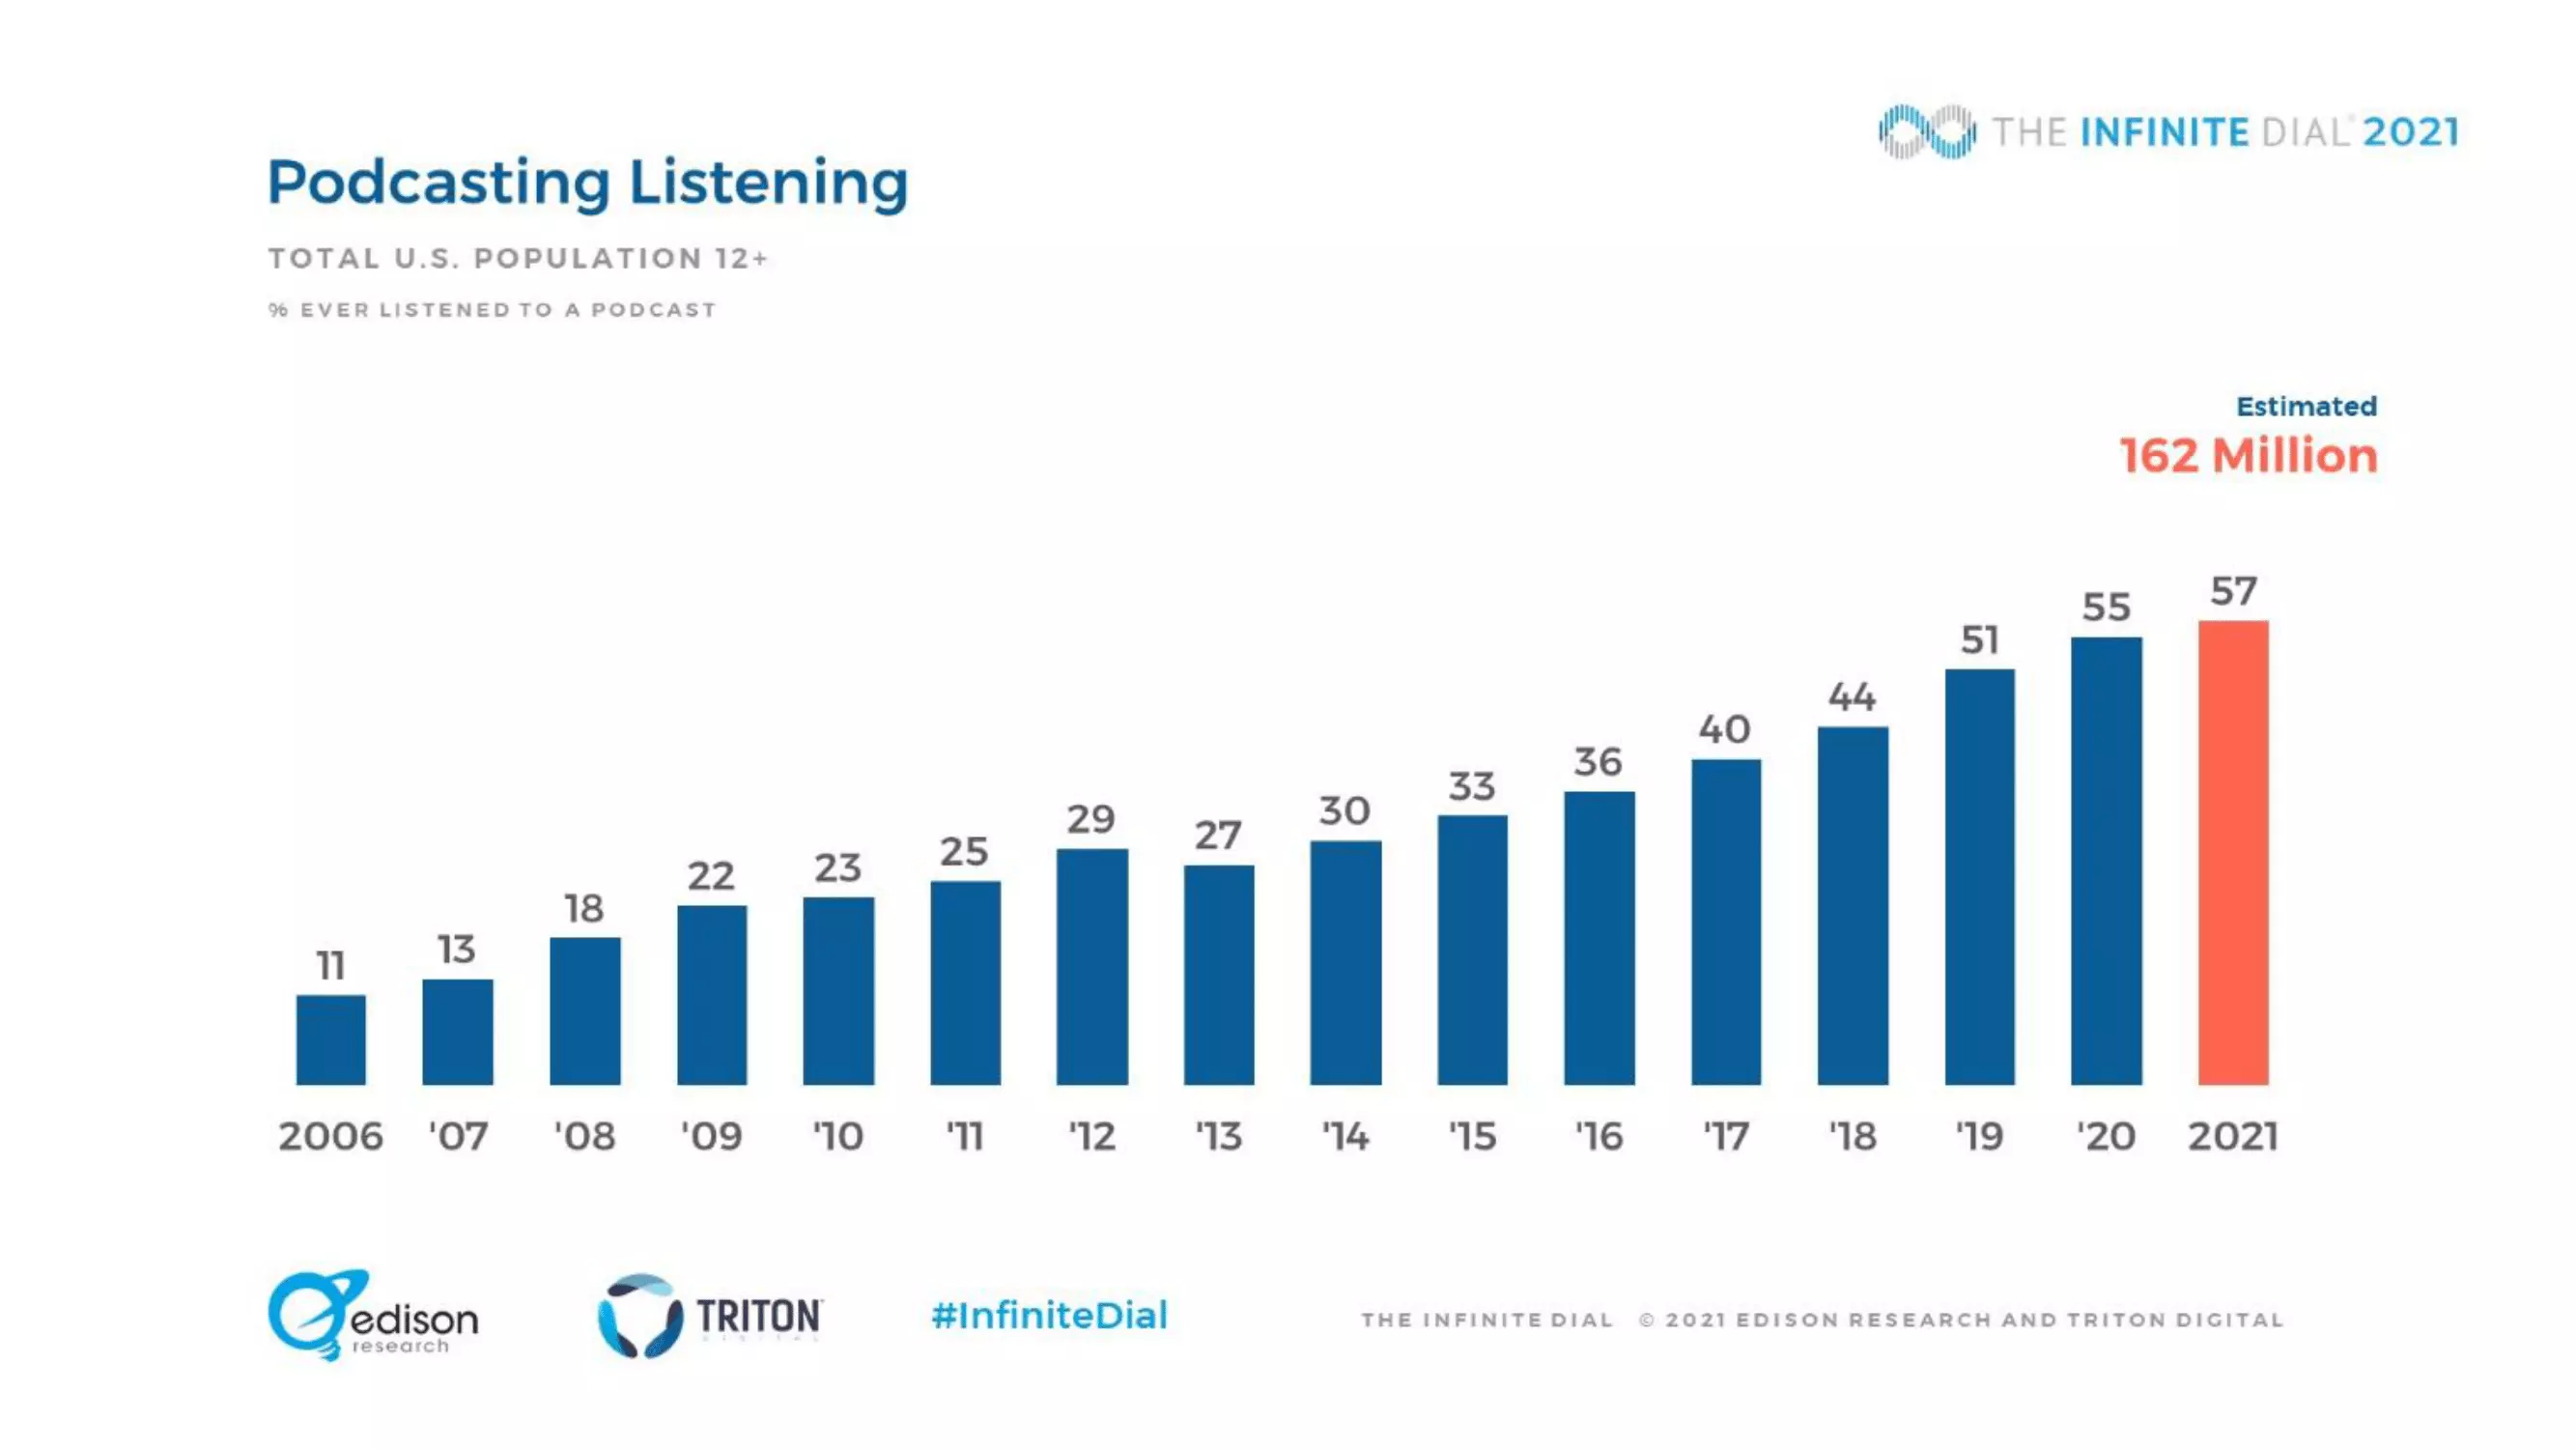 Bar graph showing increasing podcast listening estimates by year